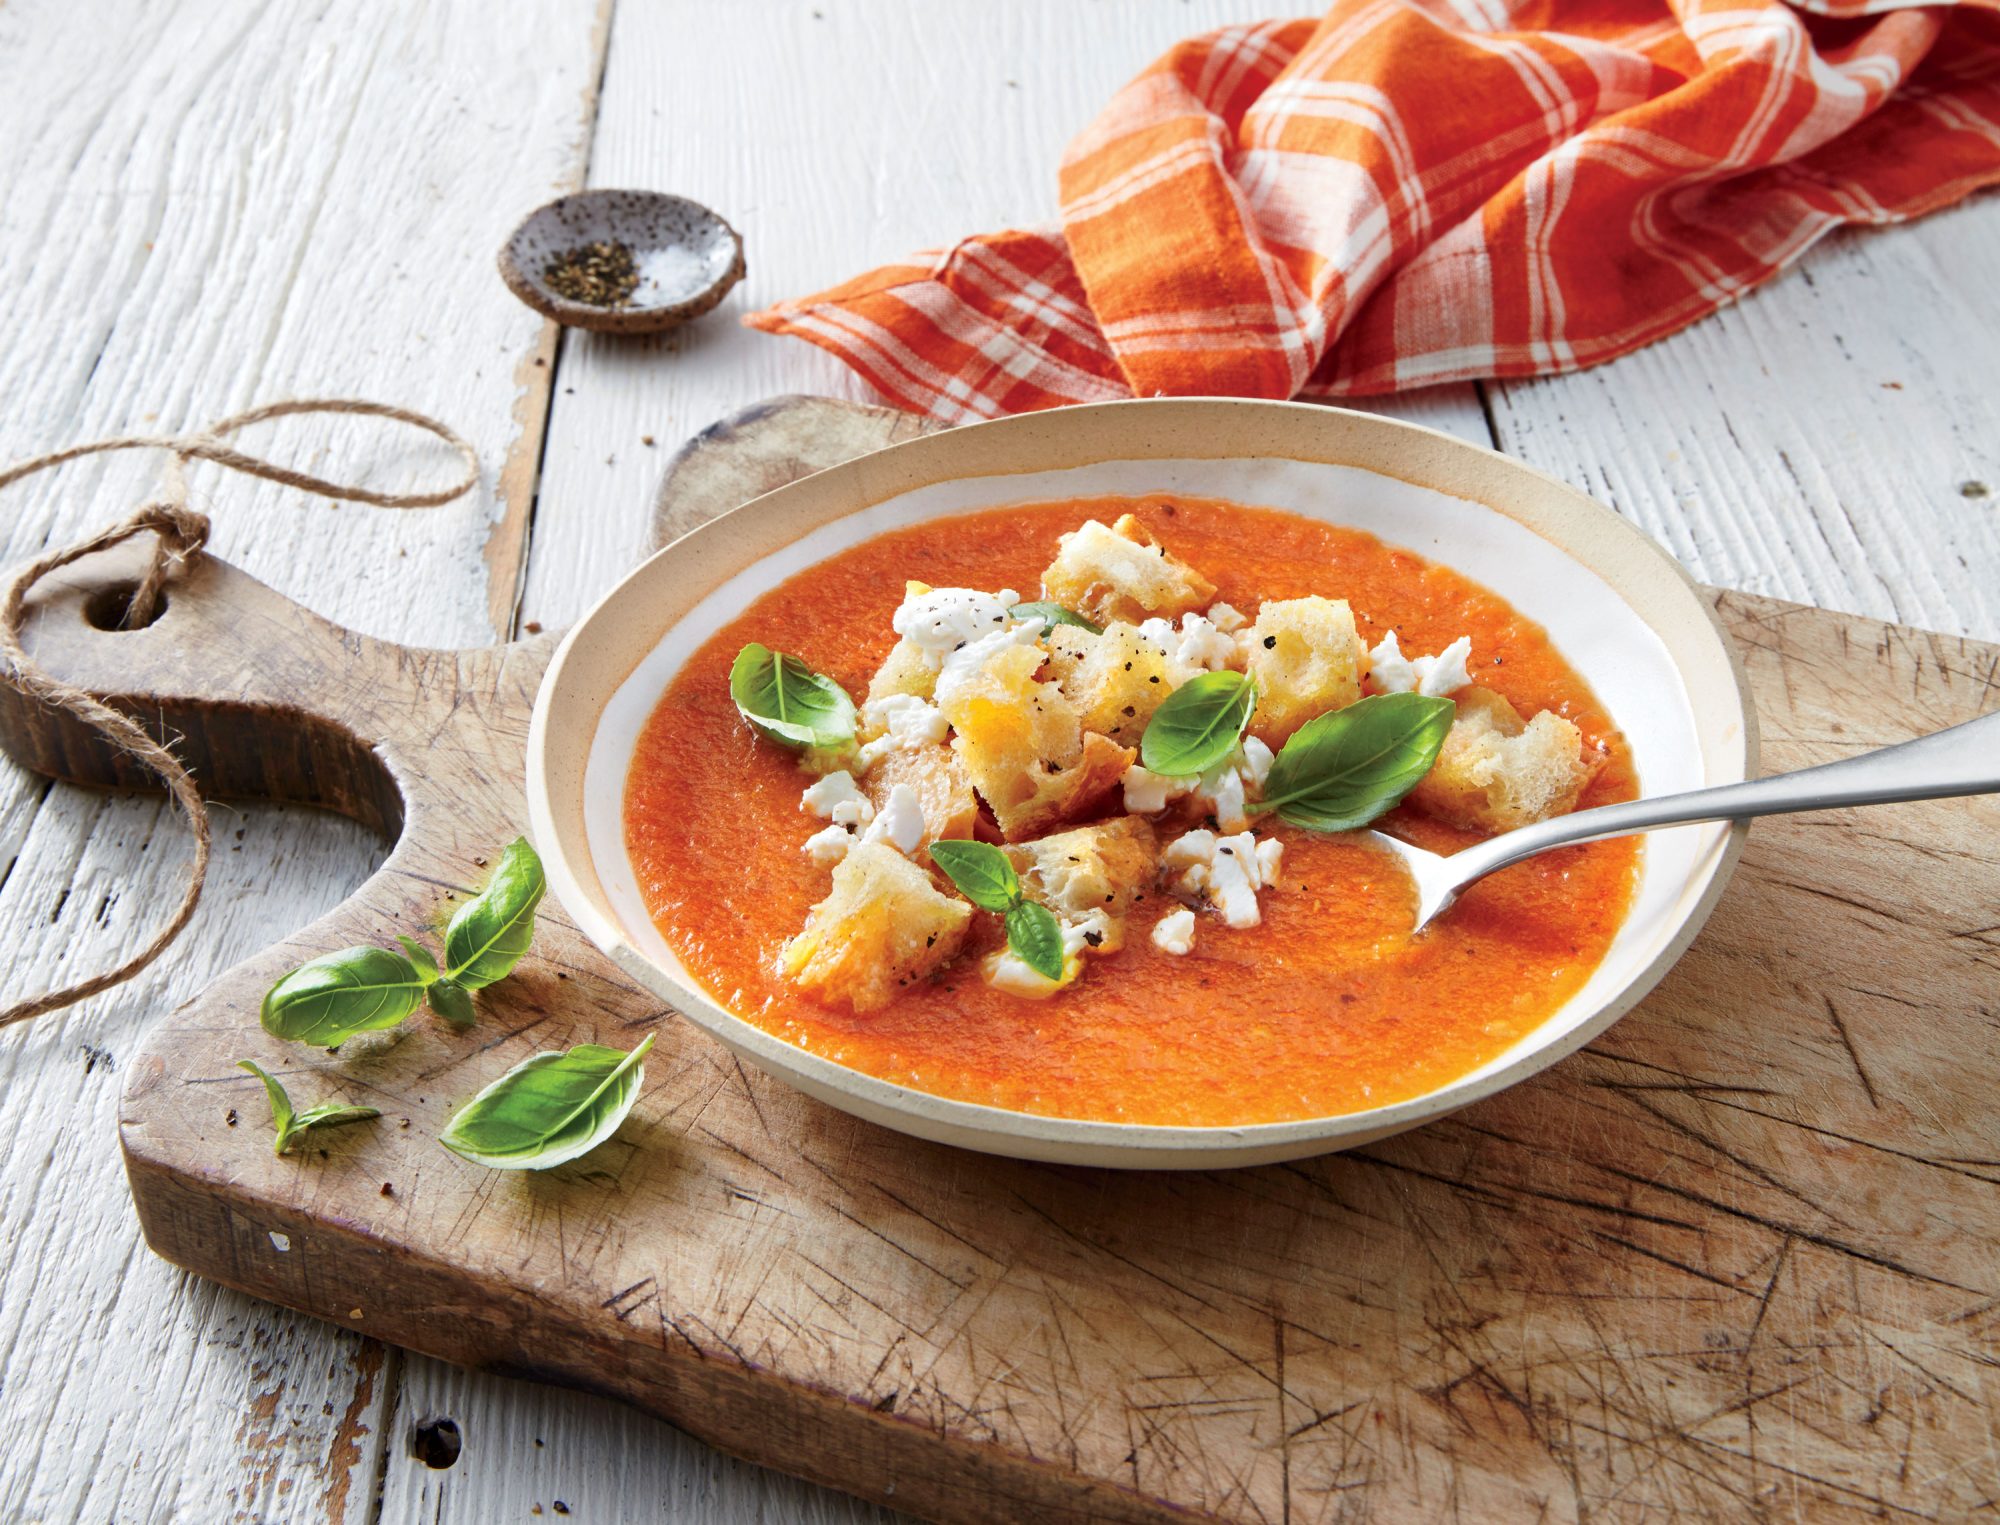 Roasted Tomato-Eggplant Soup with Garlic Croutons